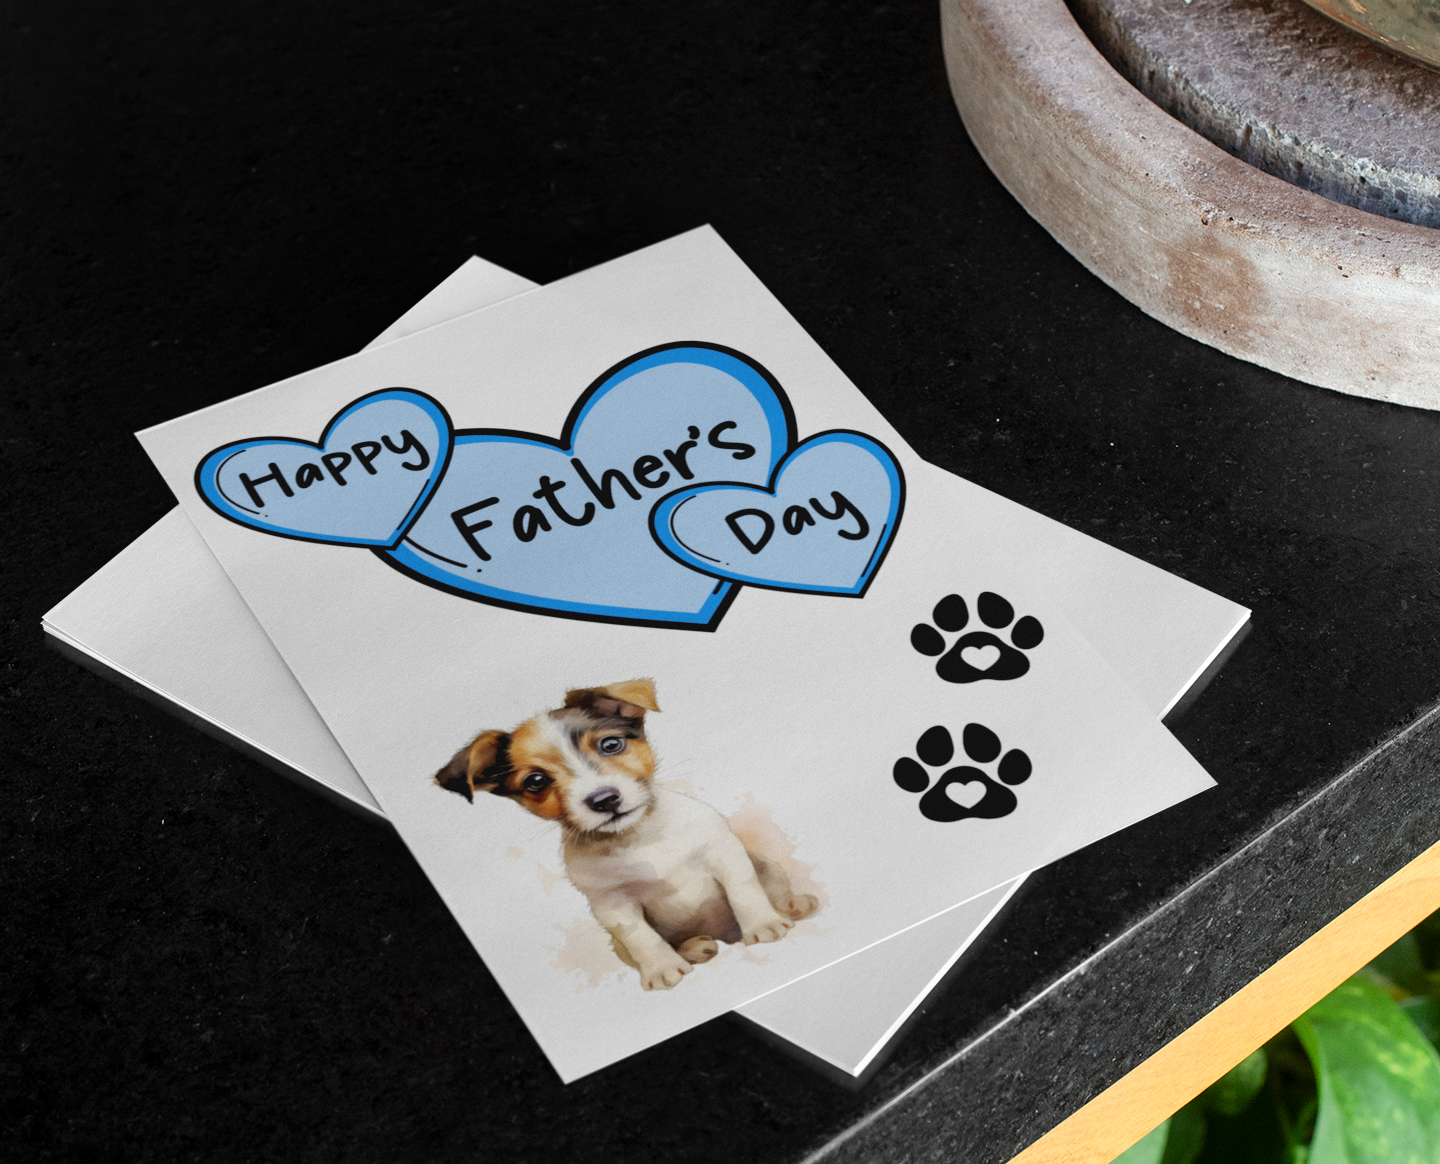 Jack Russell Father's Day Card - Nice Cute Fun Pet Dog Puppy Owner Novelty Greeting Card